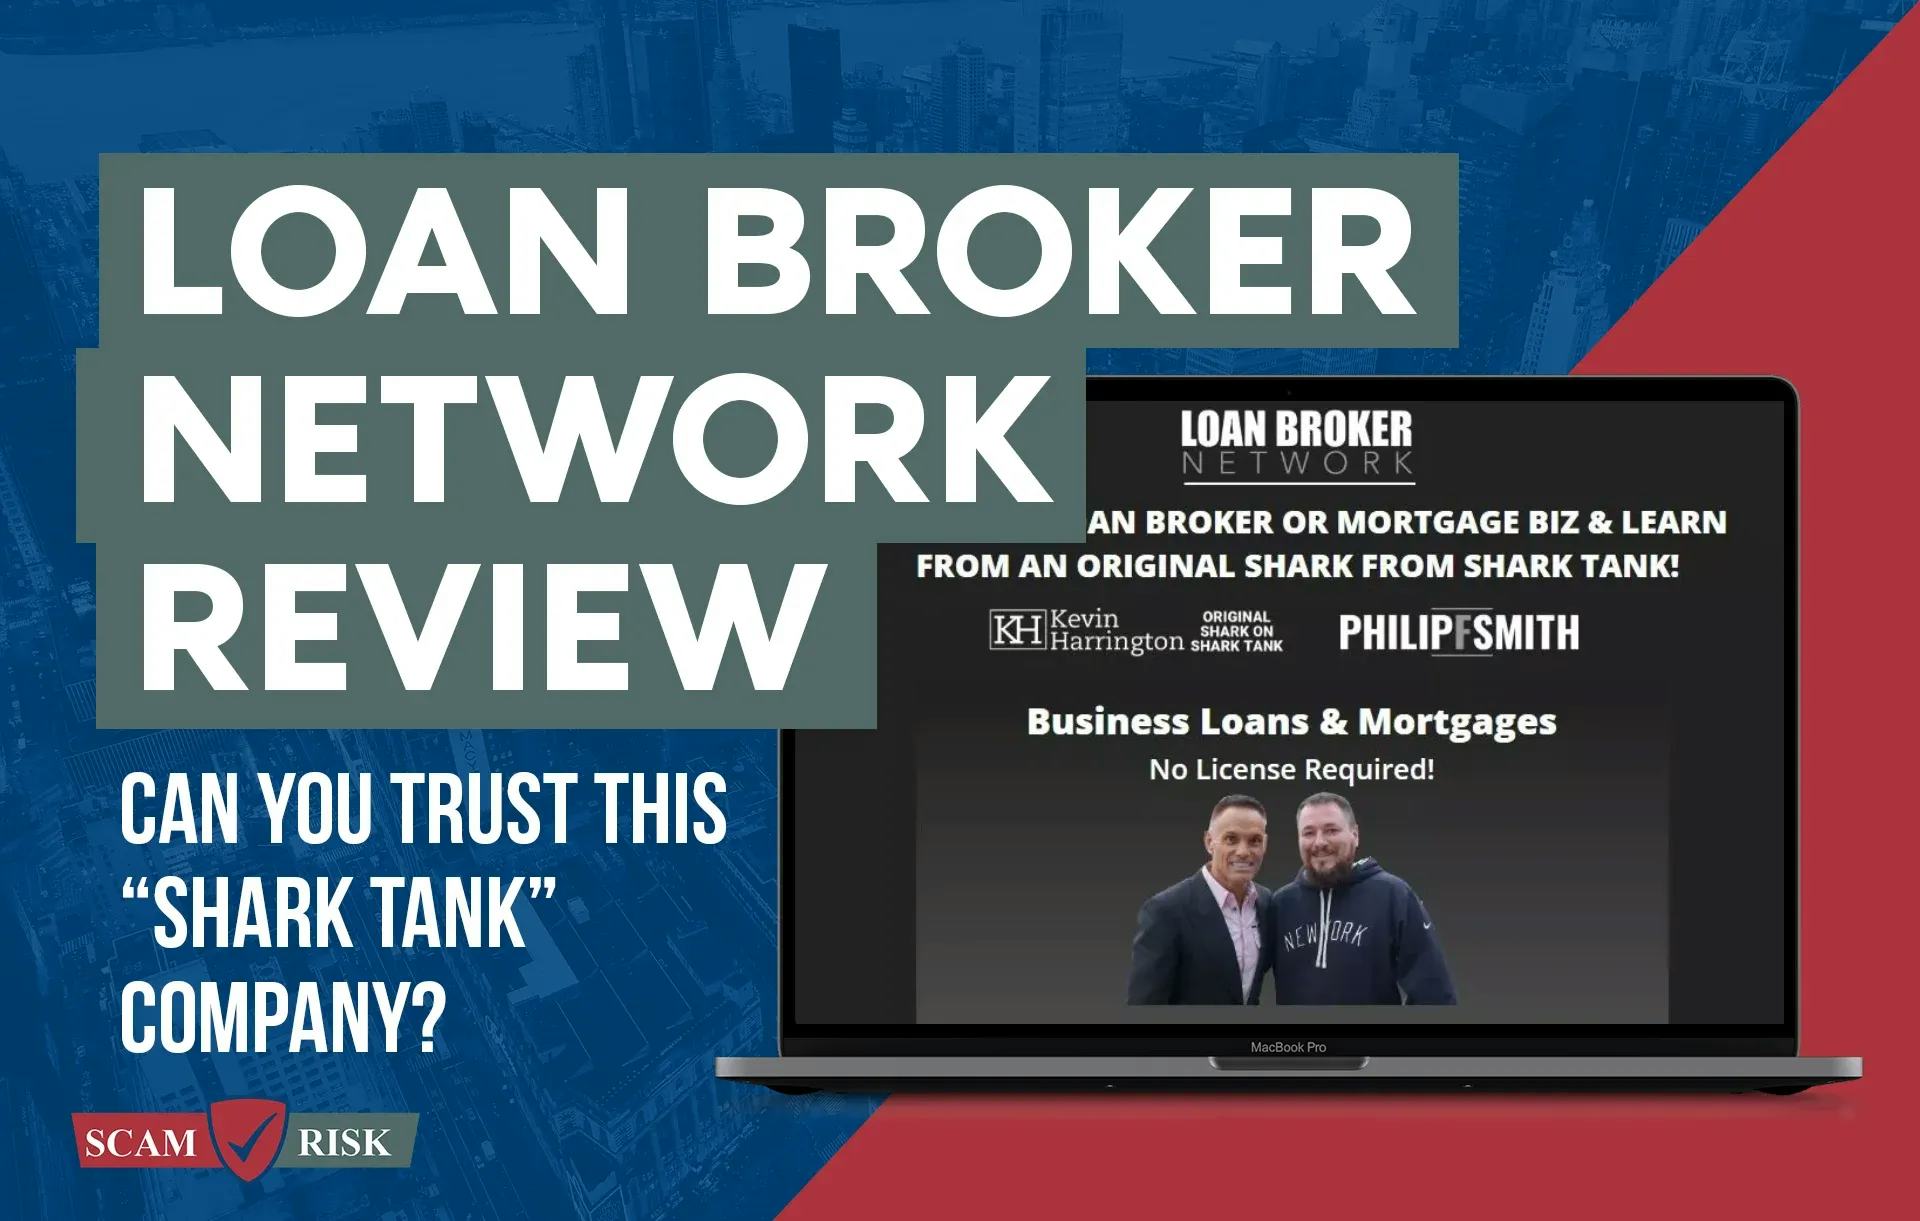 Loan Broker Network Reviews: Can You Trust This “Shark Tank” Company? ([year] Update)